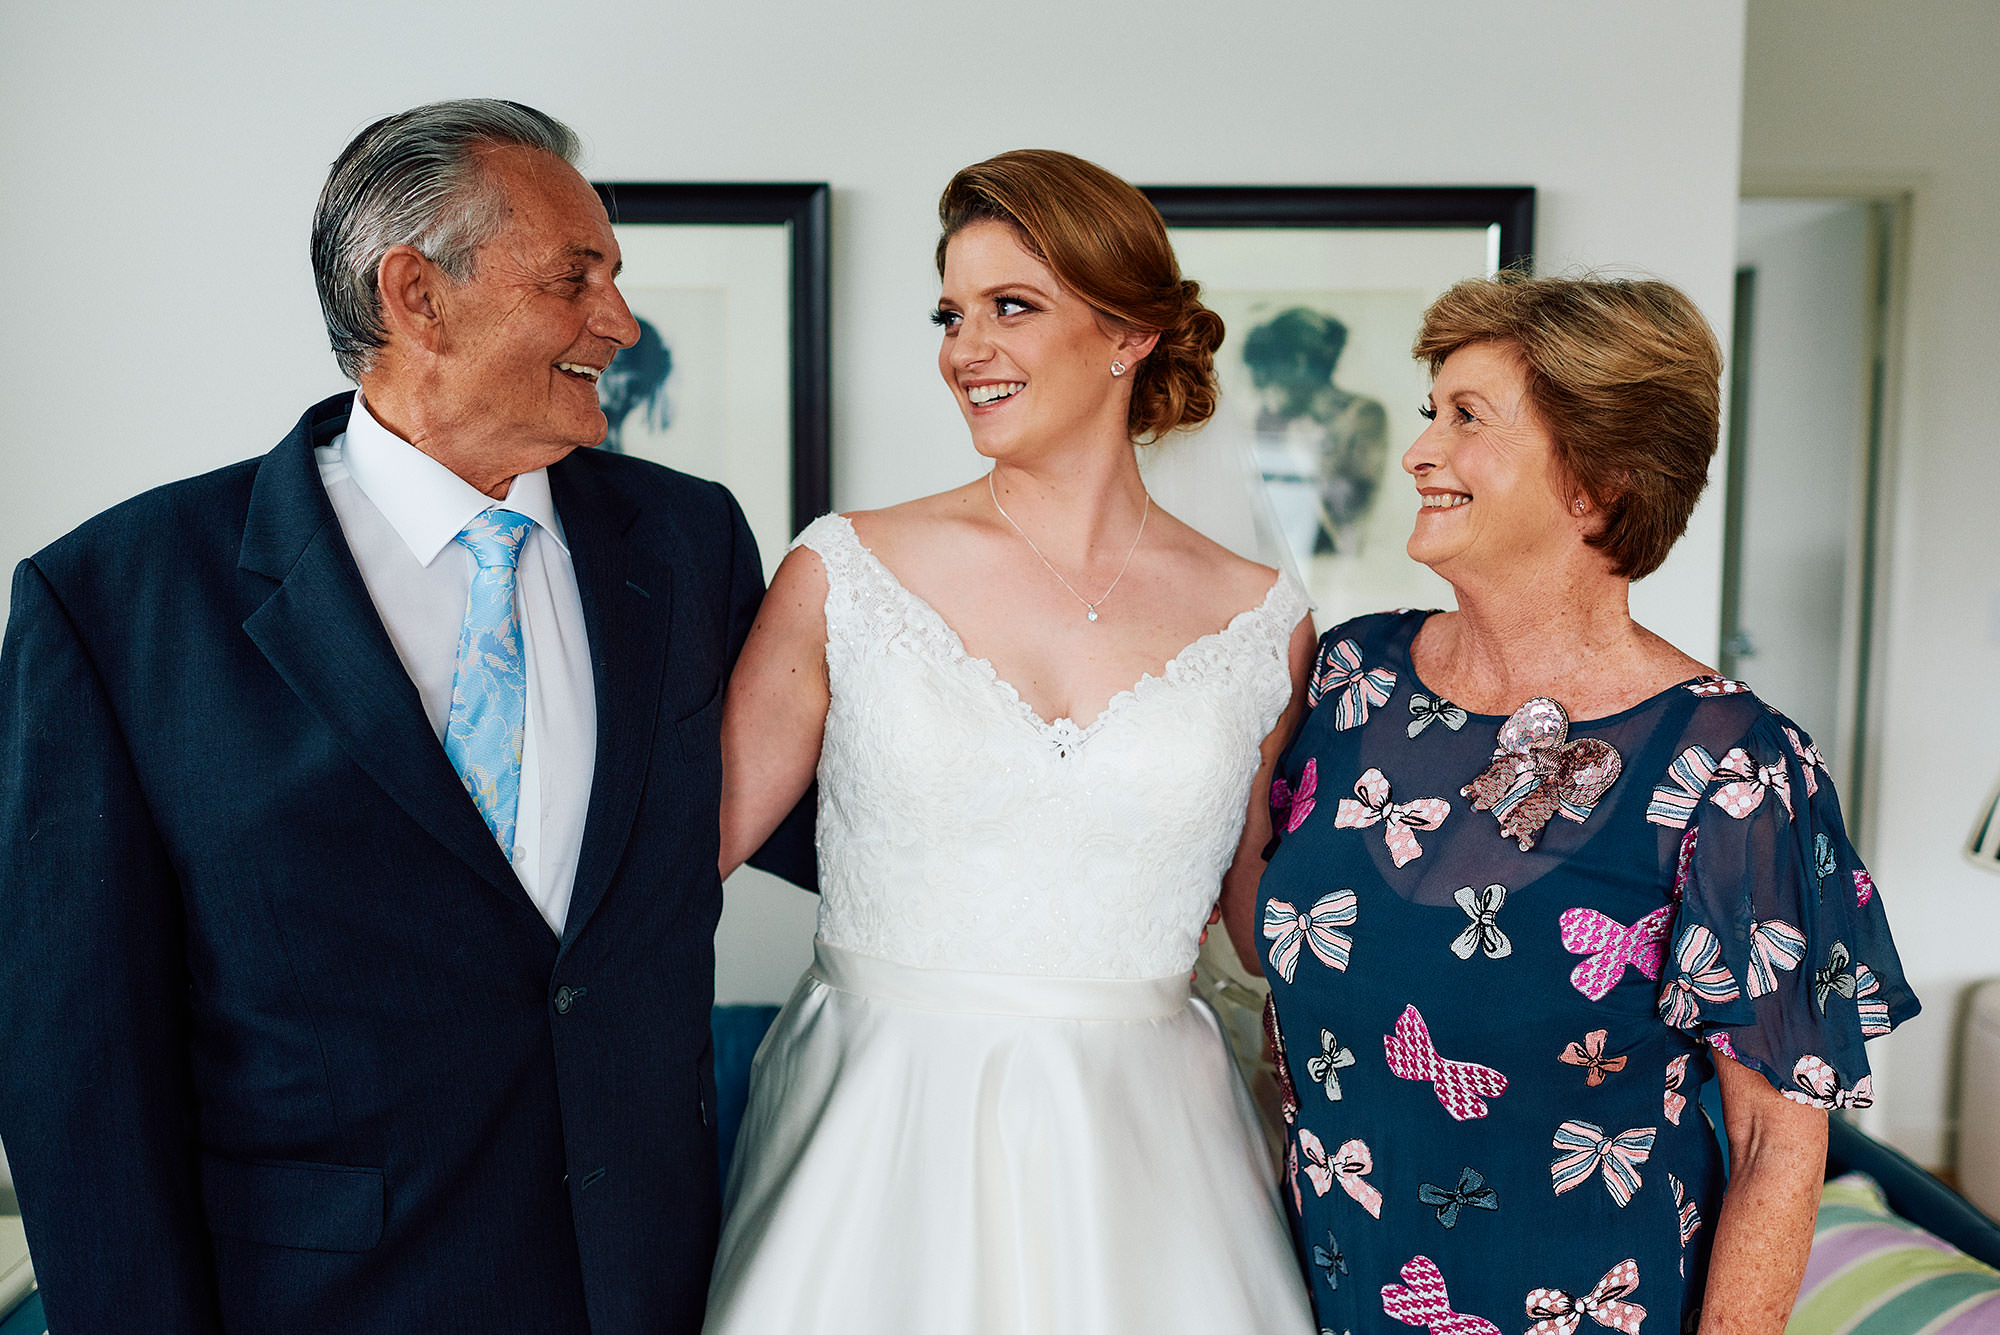 Bride with her parents before the wedding